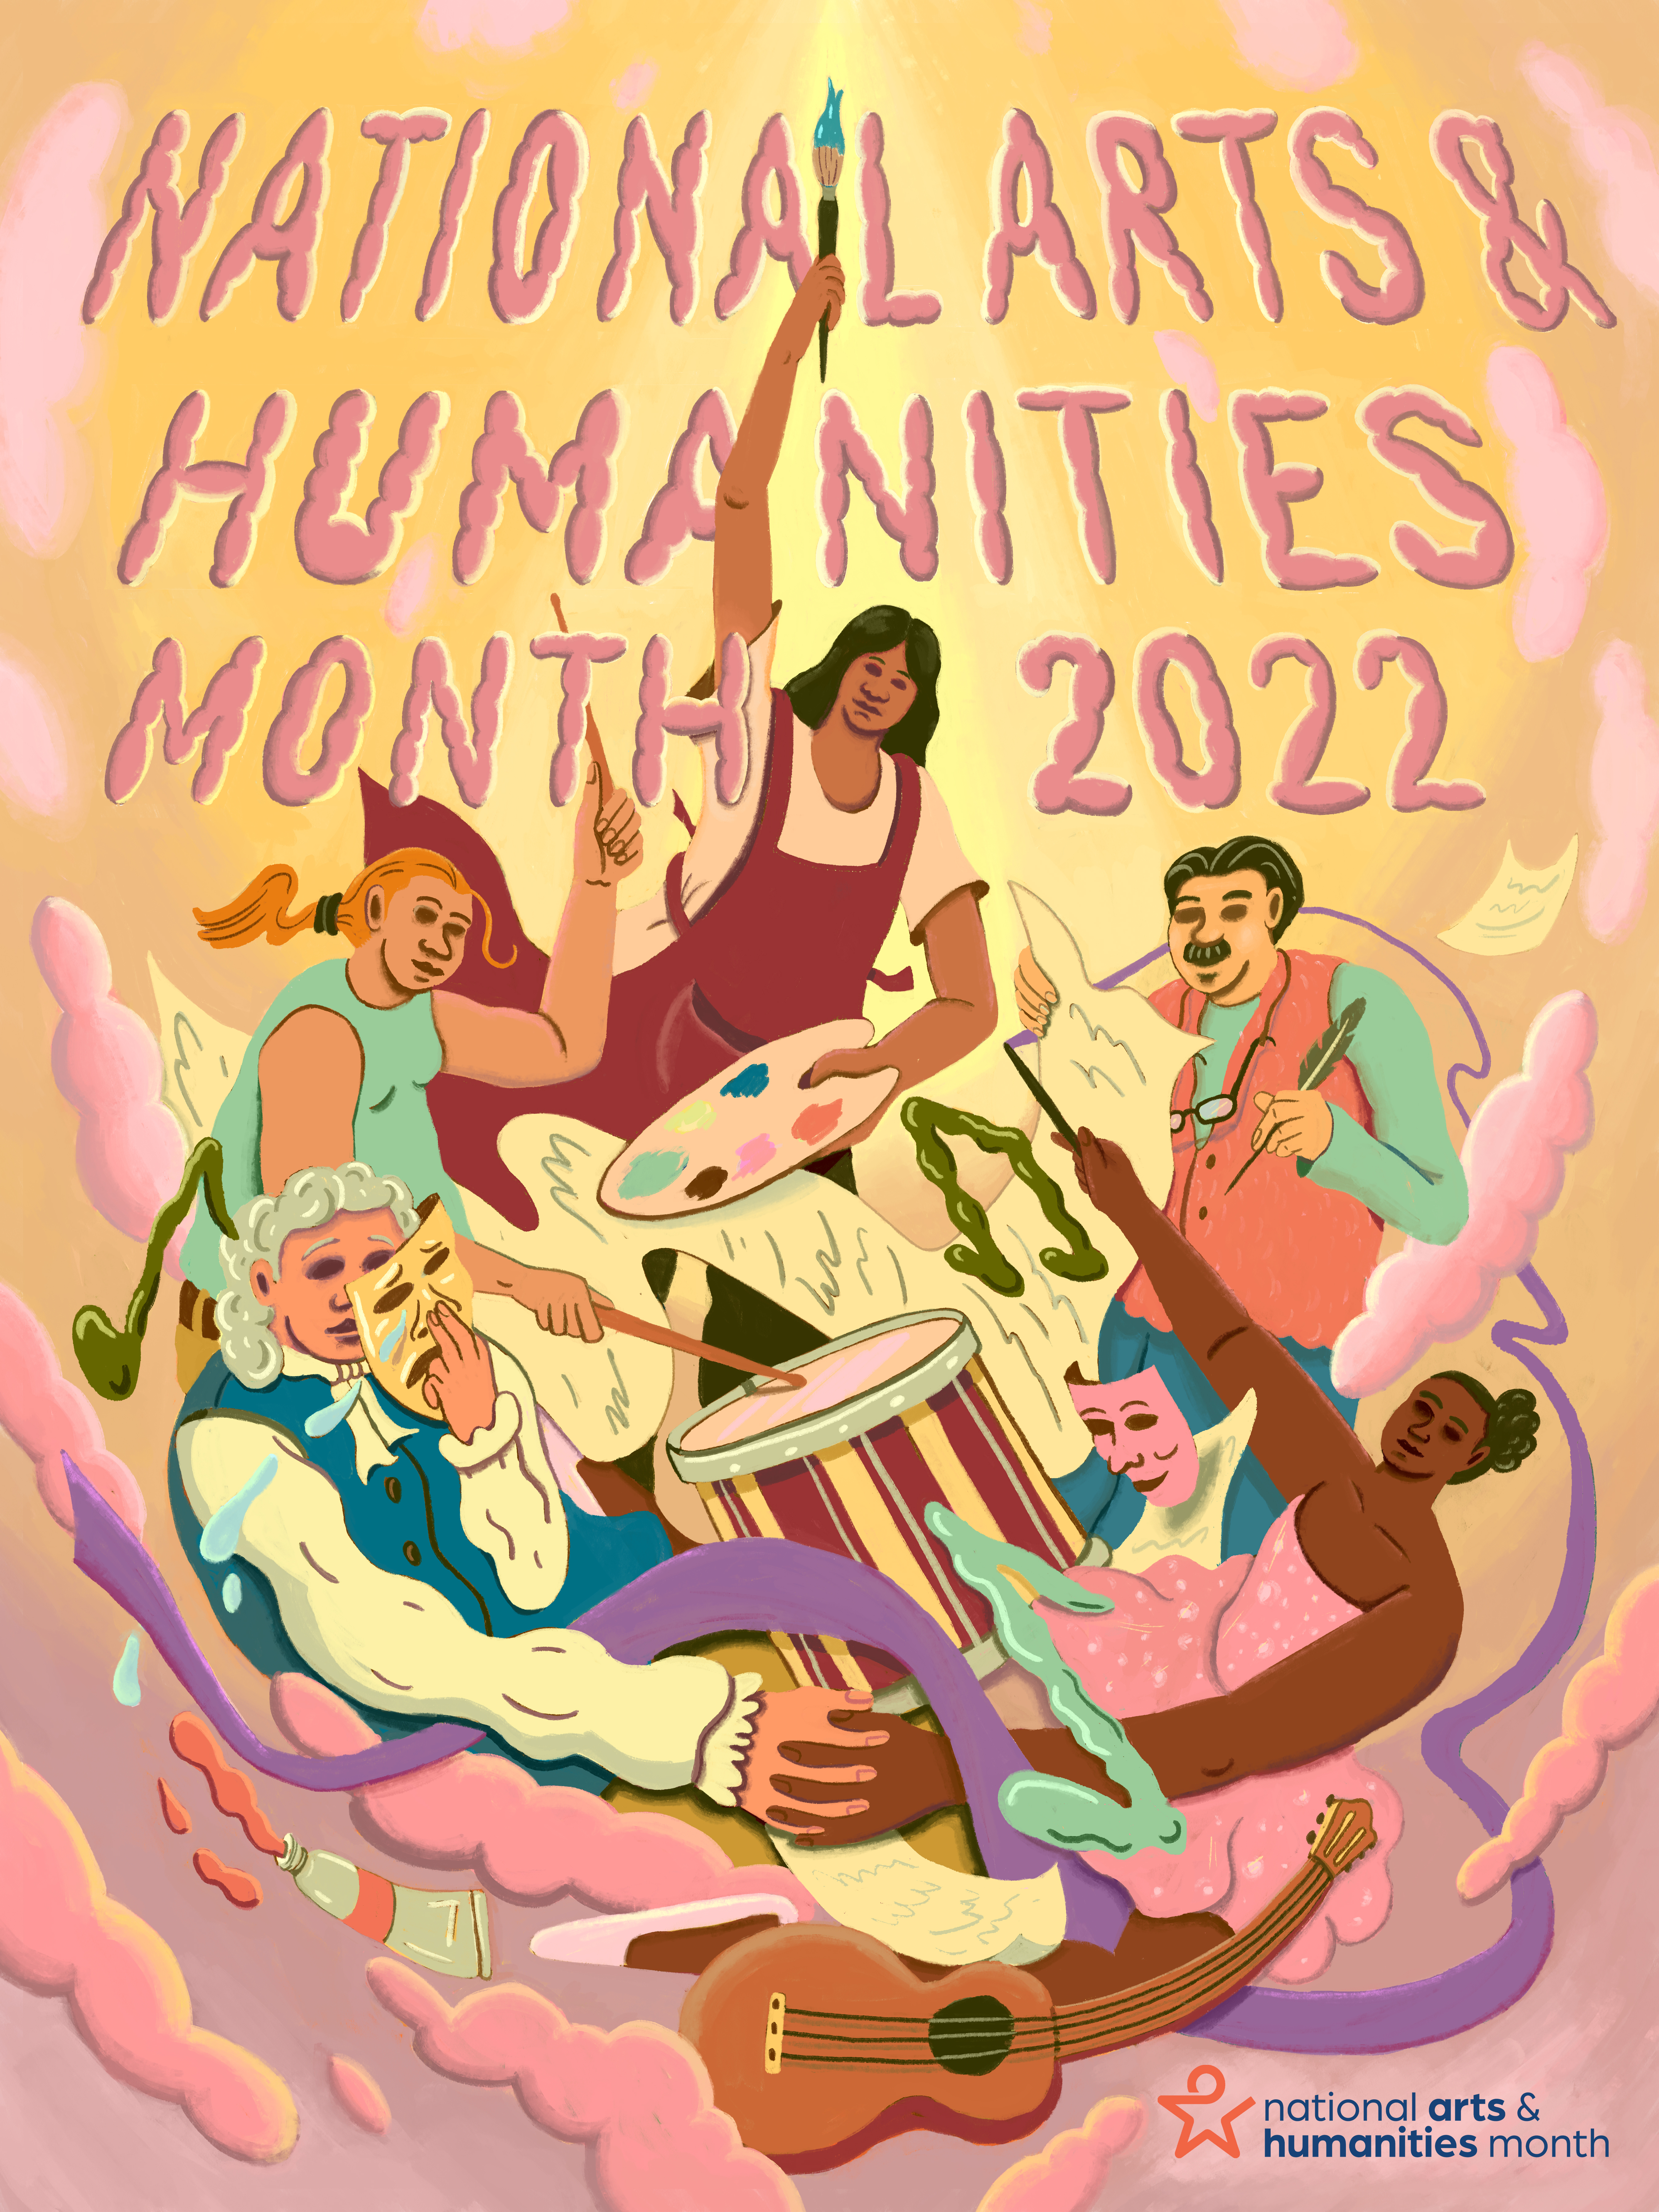 Drawing of people creating art, music, and drama surrounded by pink clouds. 'National Arts & Humanities Month 2022.'